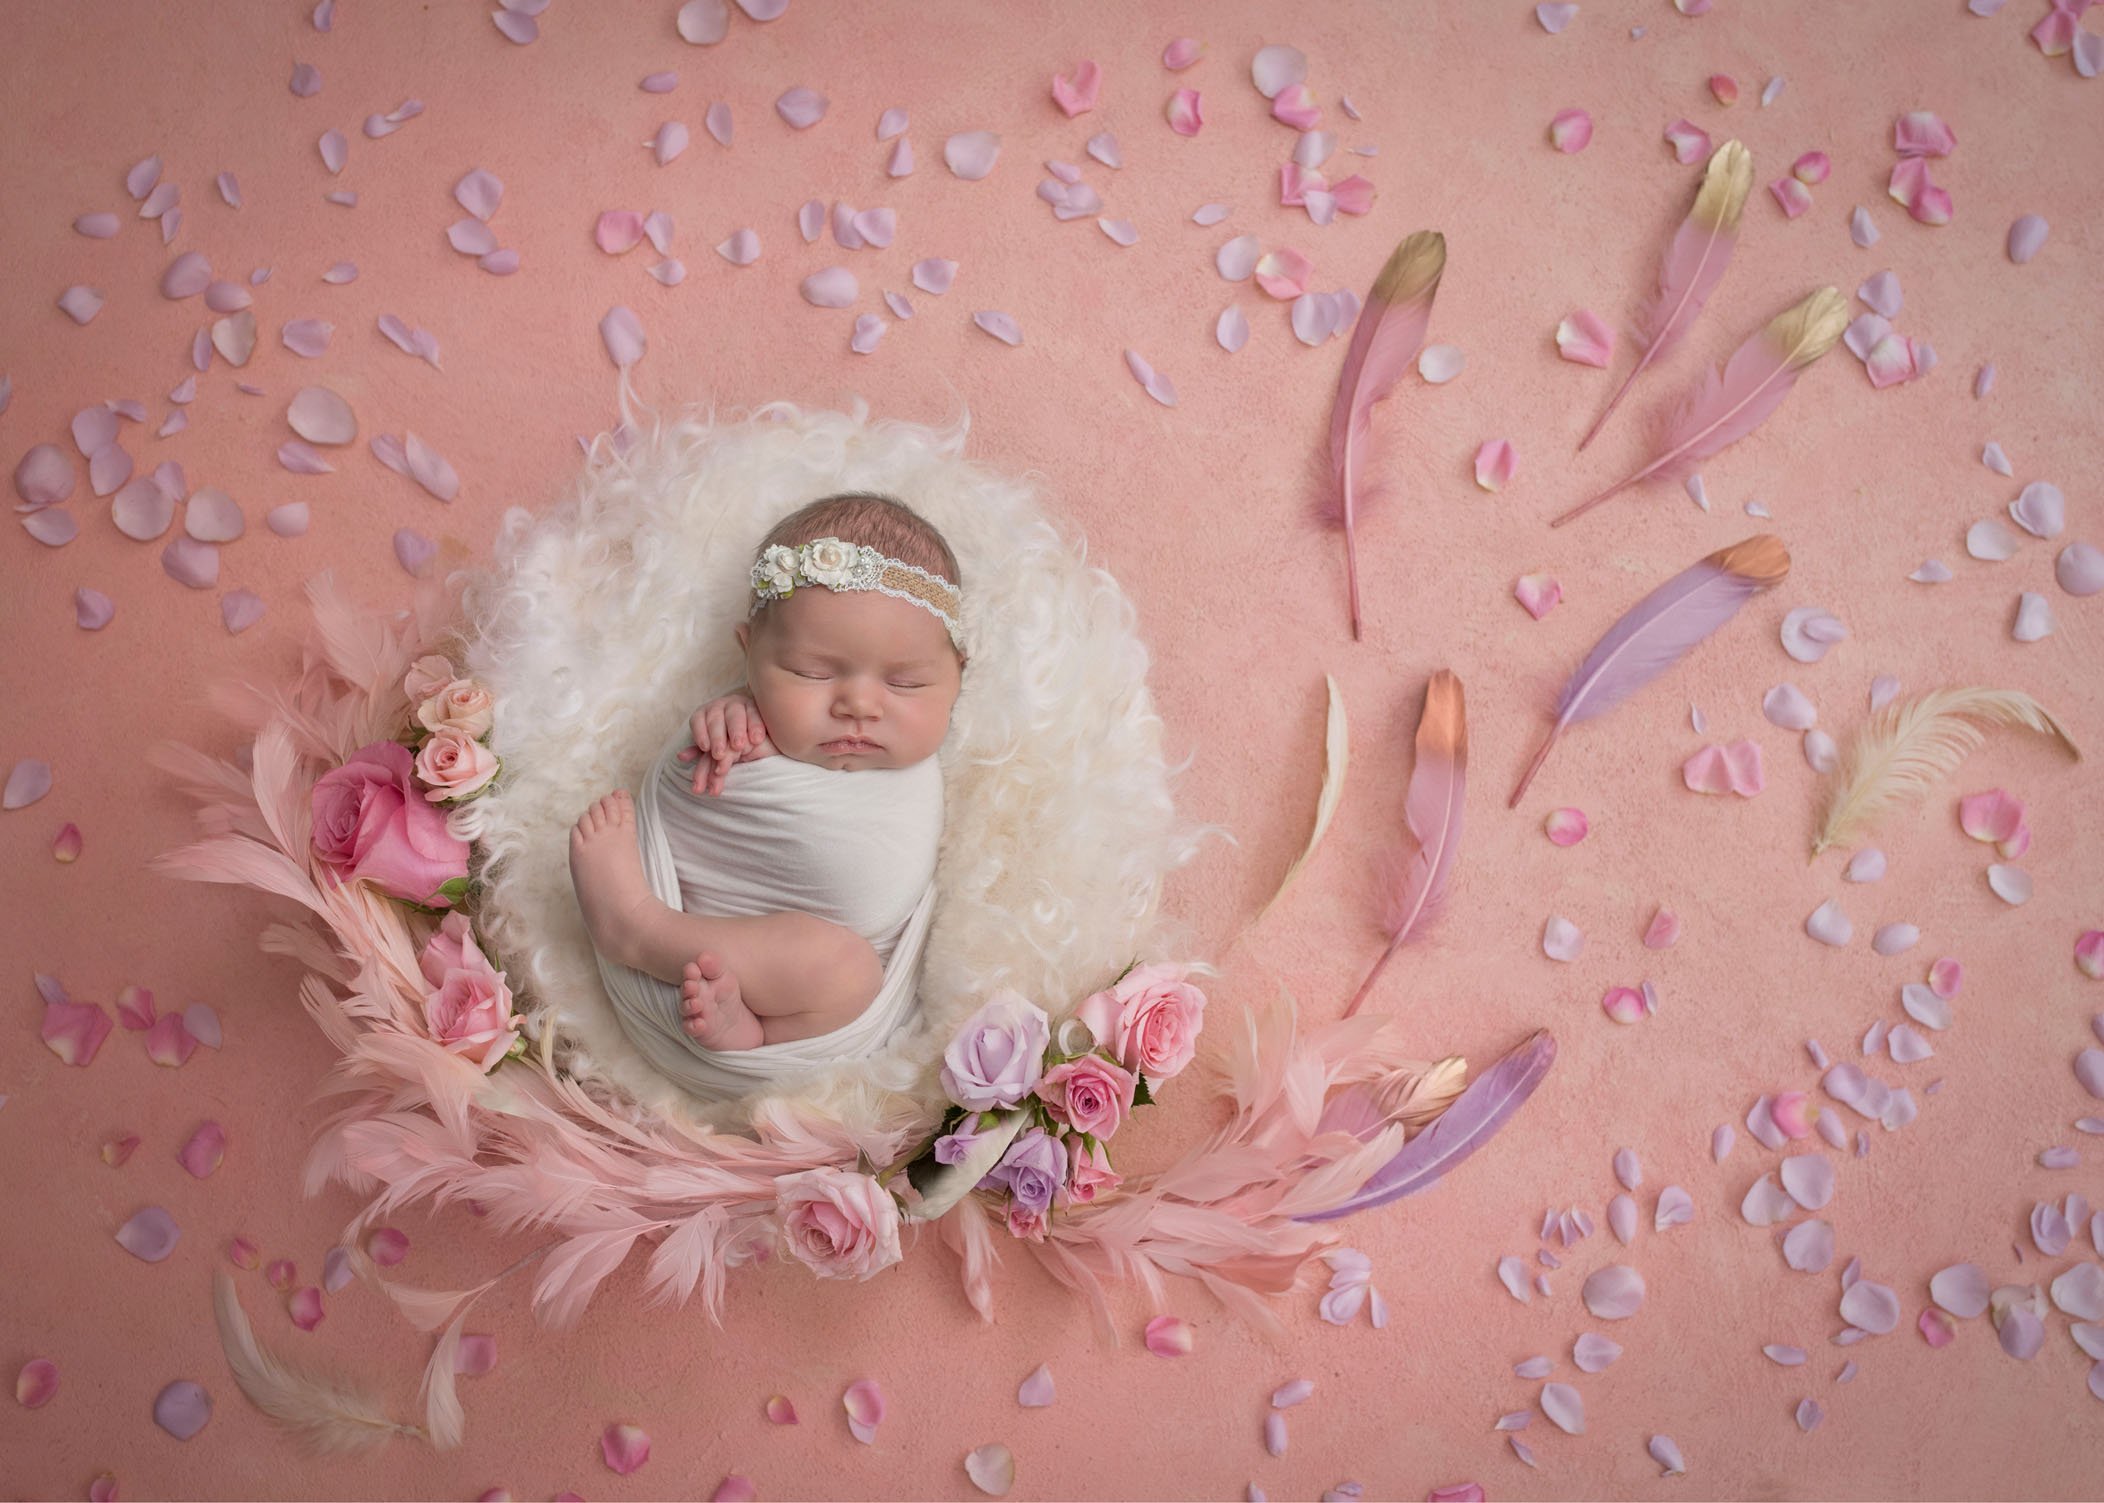 newborn baby girl sleeping in cream fluff on pink background with feathers and flowers